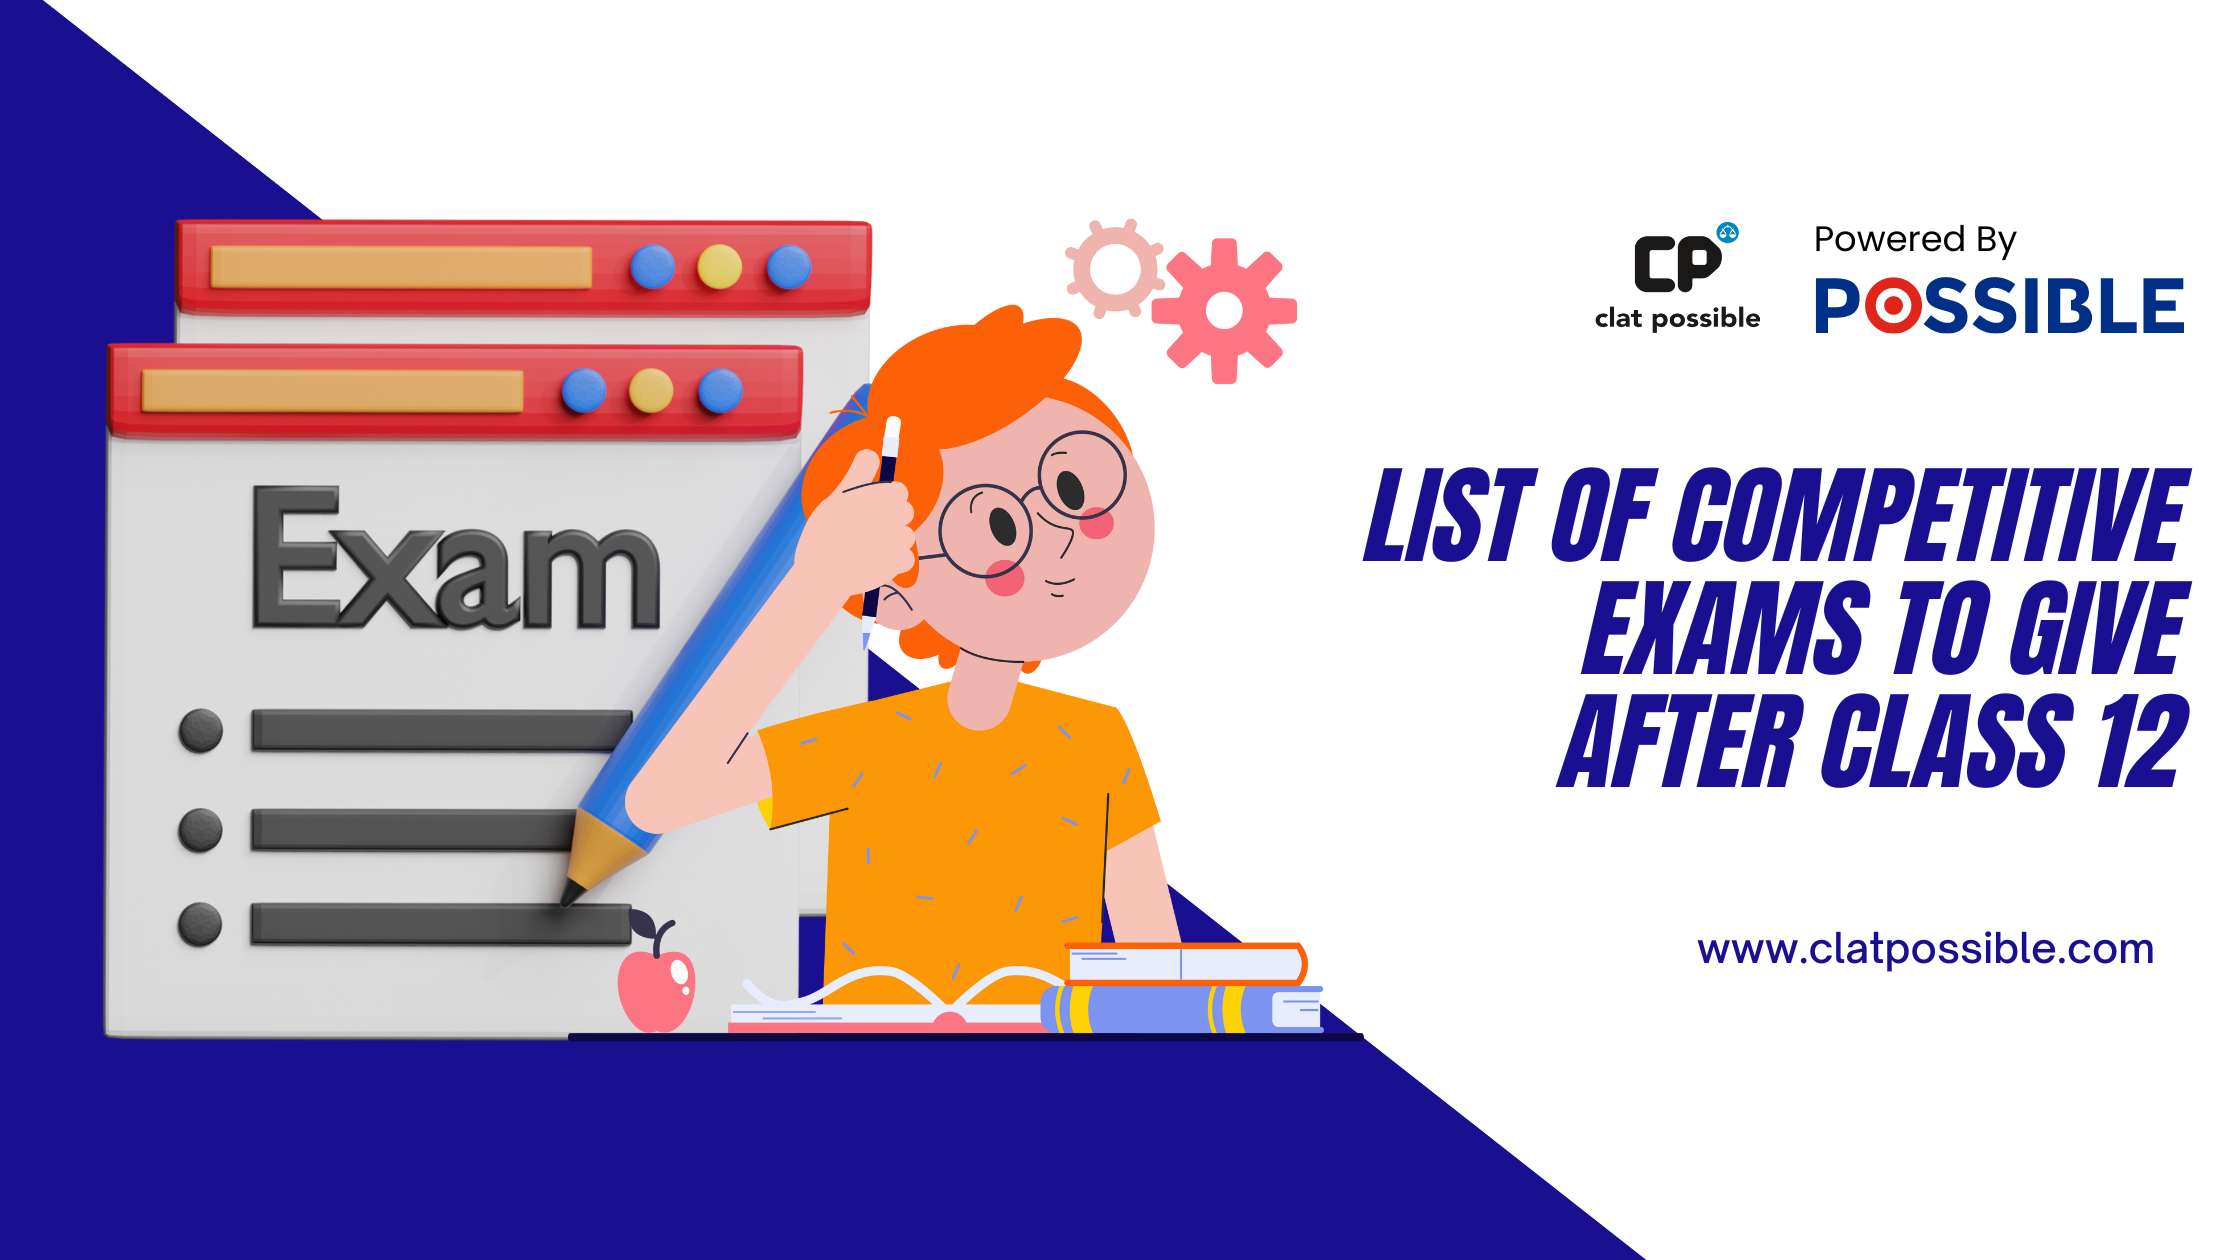 List of Competitive Exams to Give After Class 12